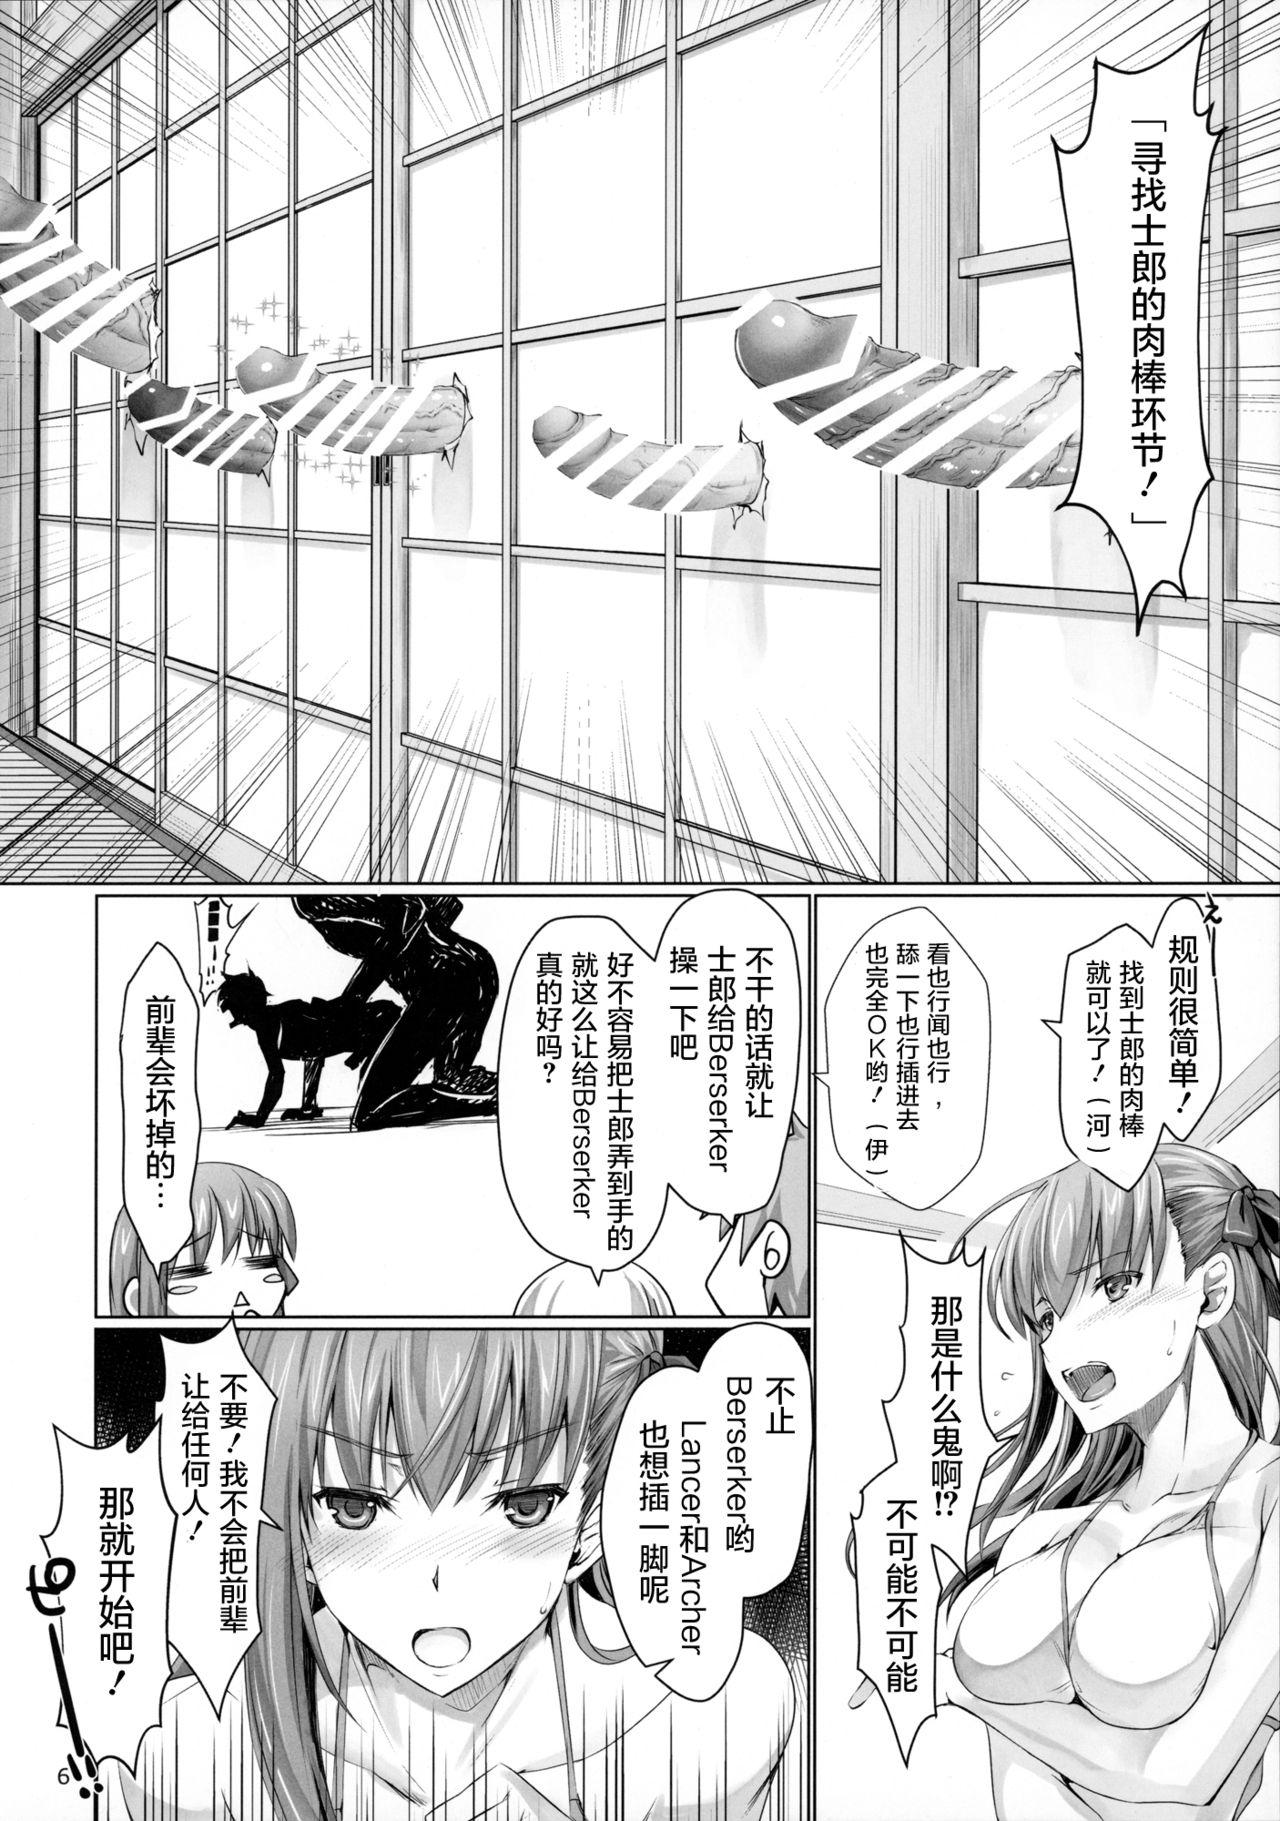 Gay Military I miss you. - Fate stay night Amateur Sex - Page 6